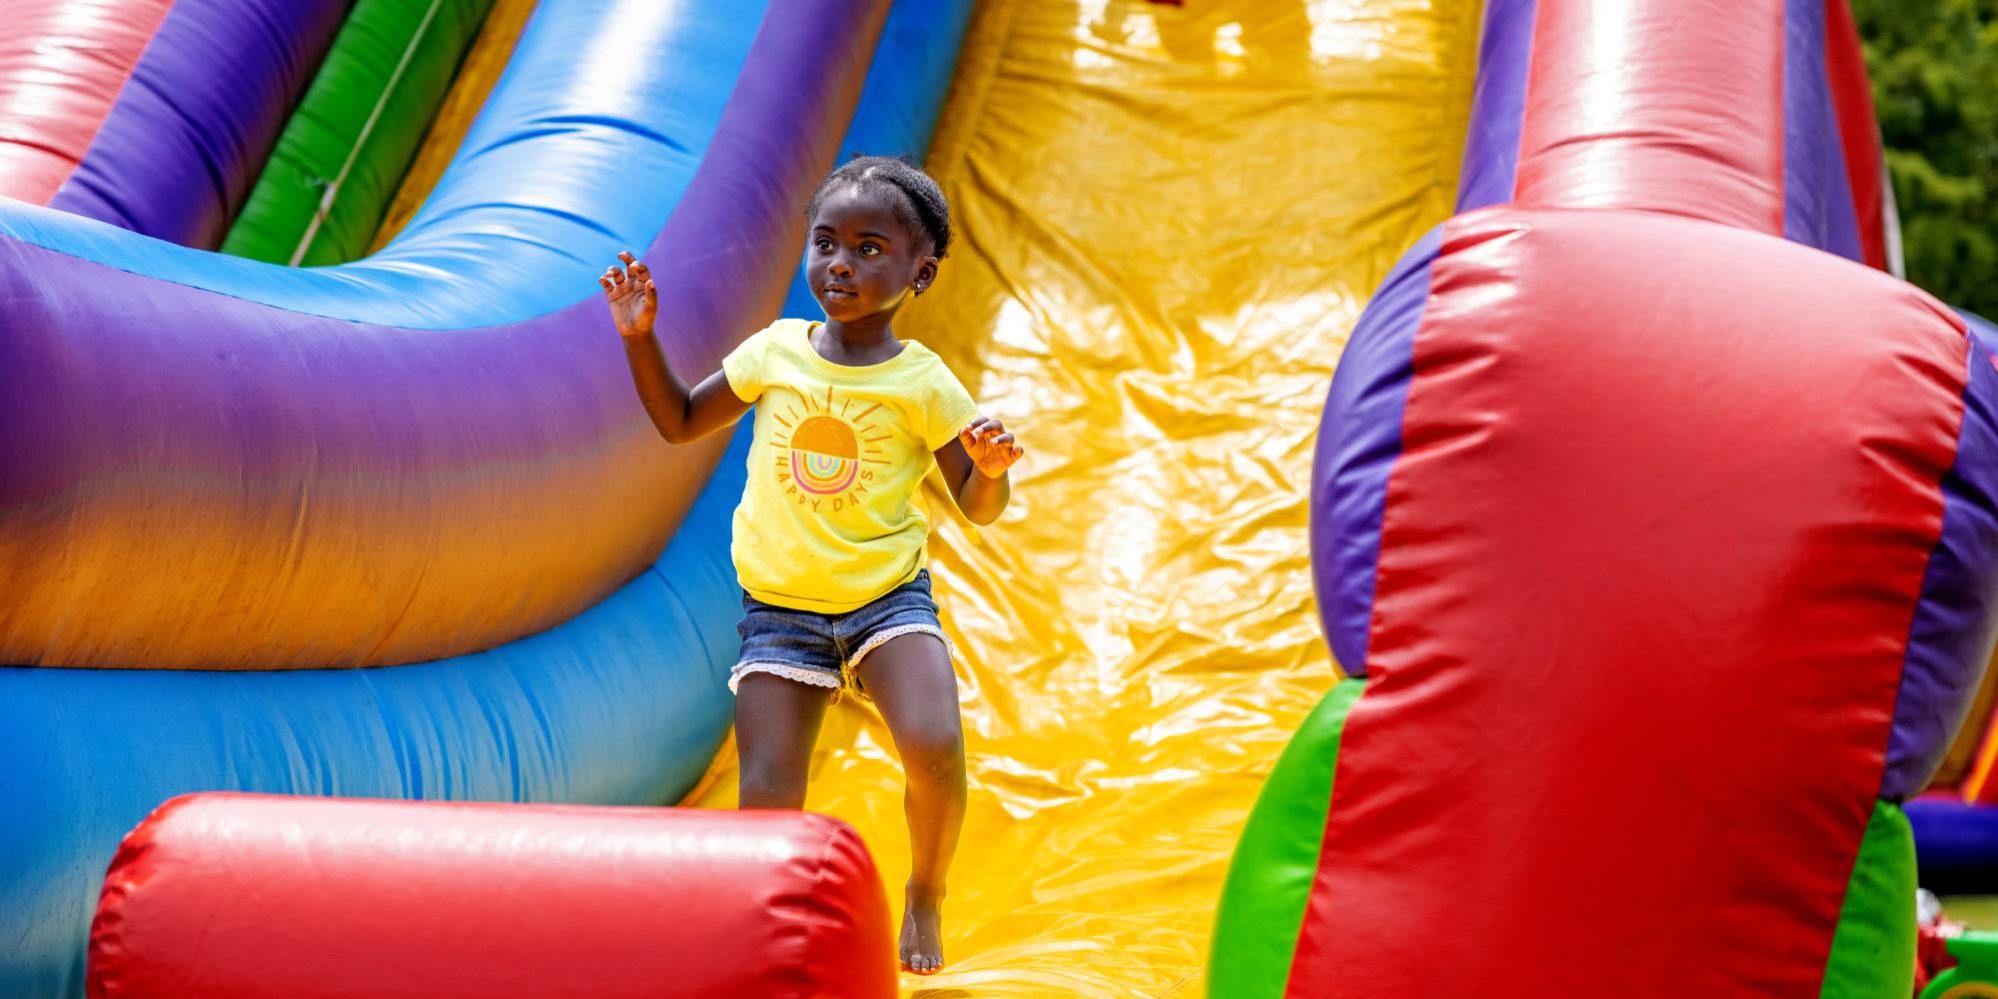 A young girl on an inflatable slide at Marquette Community Day in Dutchtown, St. Louis, MO.